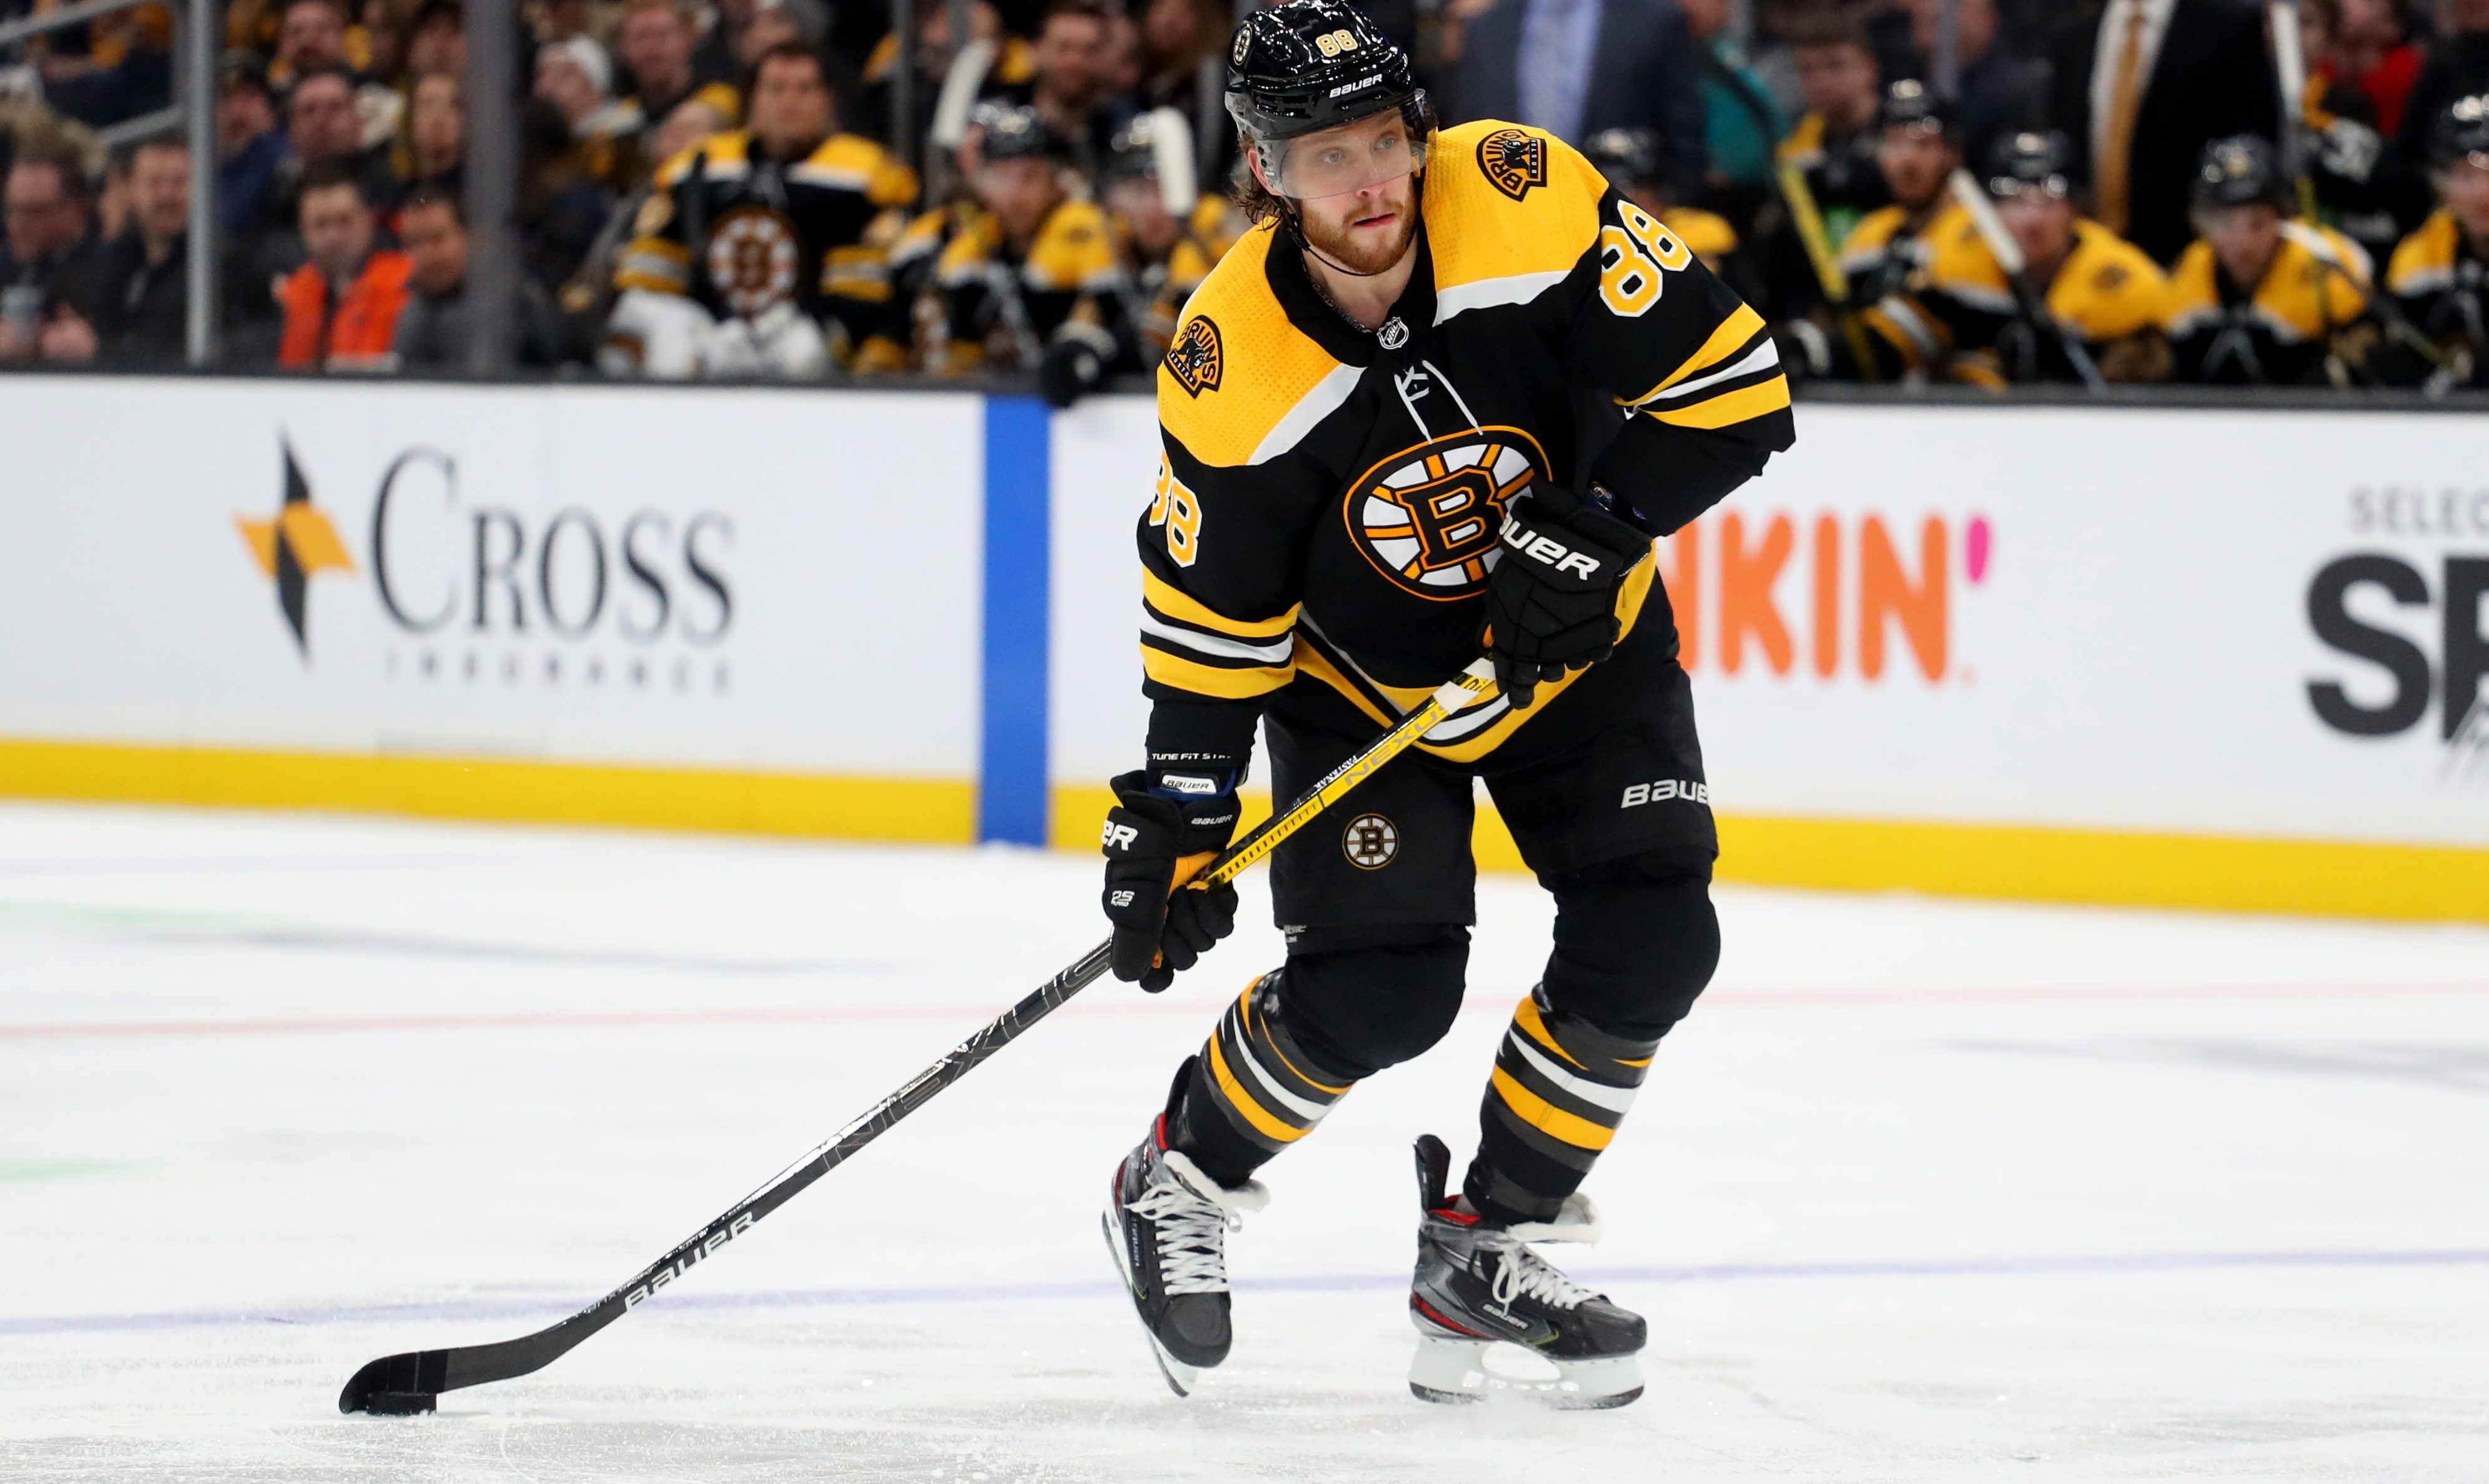 NHL Scores: David Pastrnak leads Bruins win with another hat trick